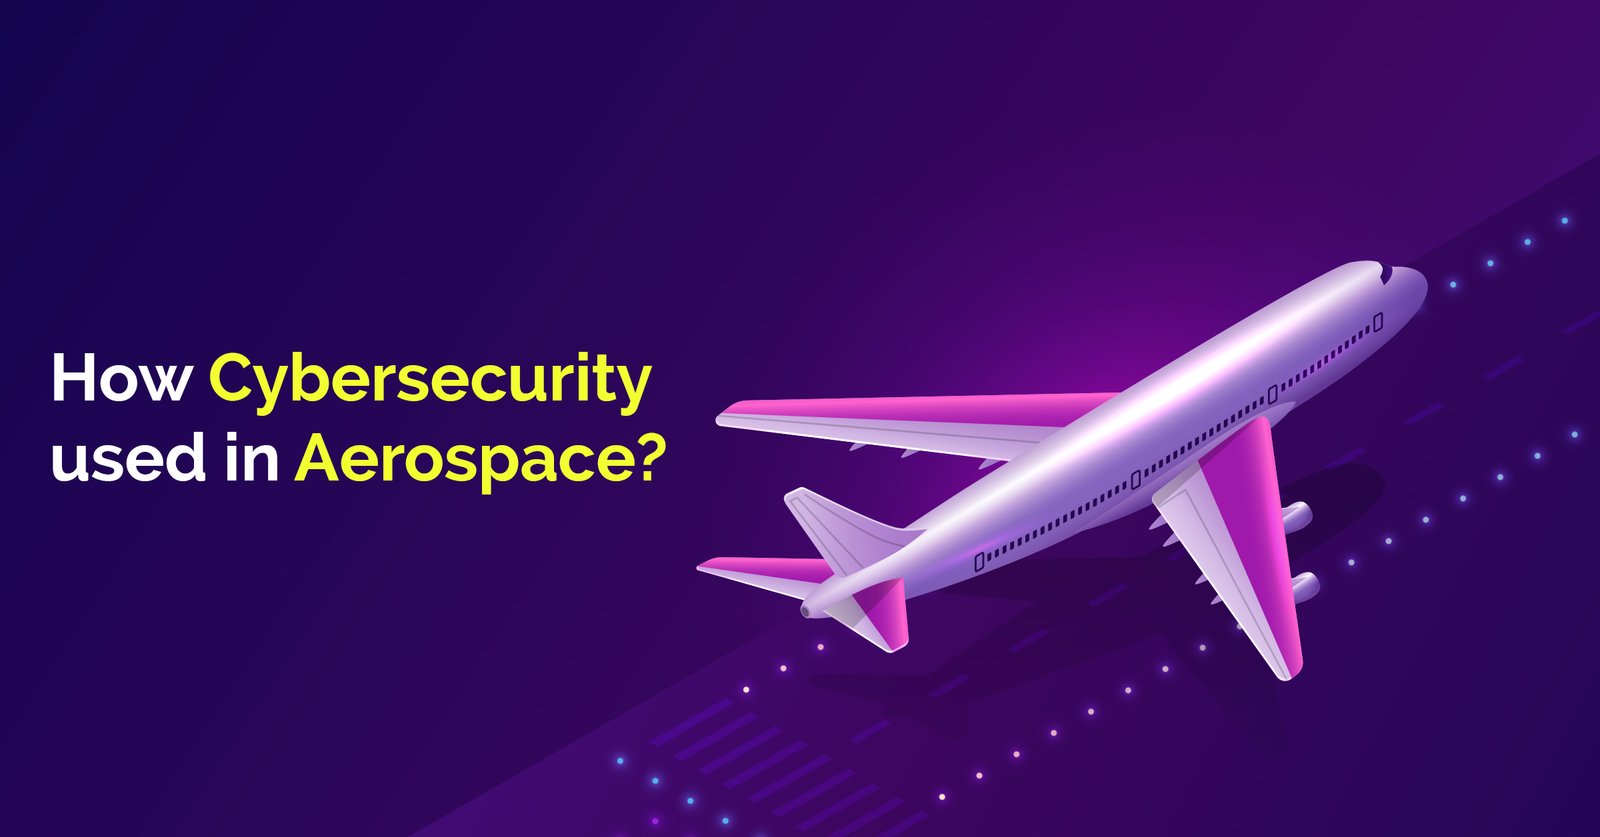 How Cybersecurity used in Aerospace?